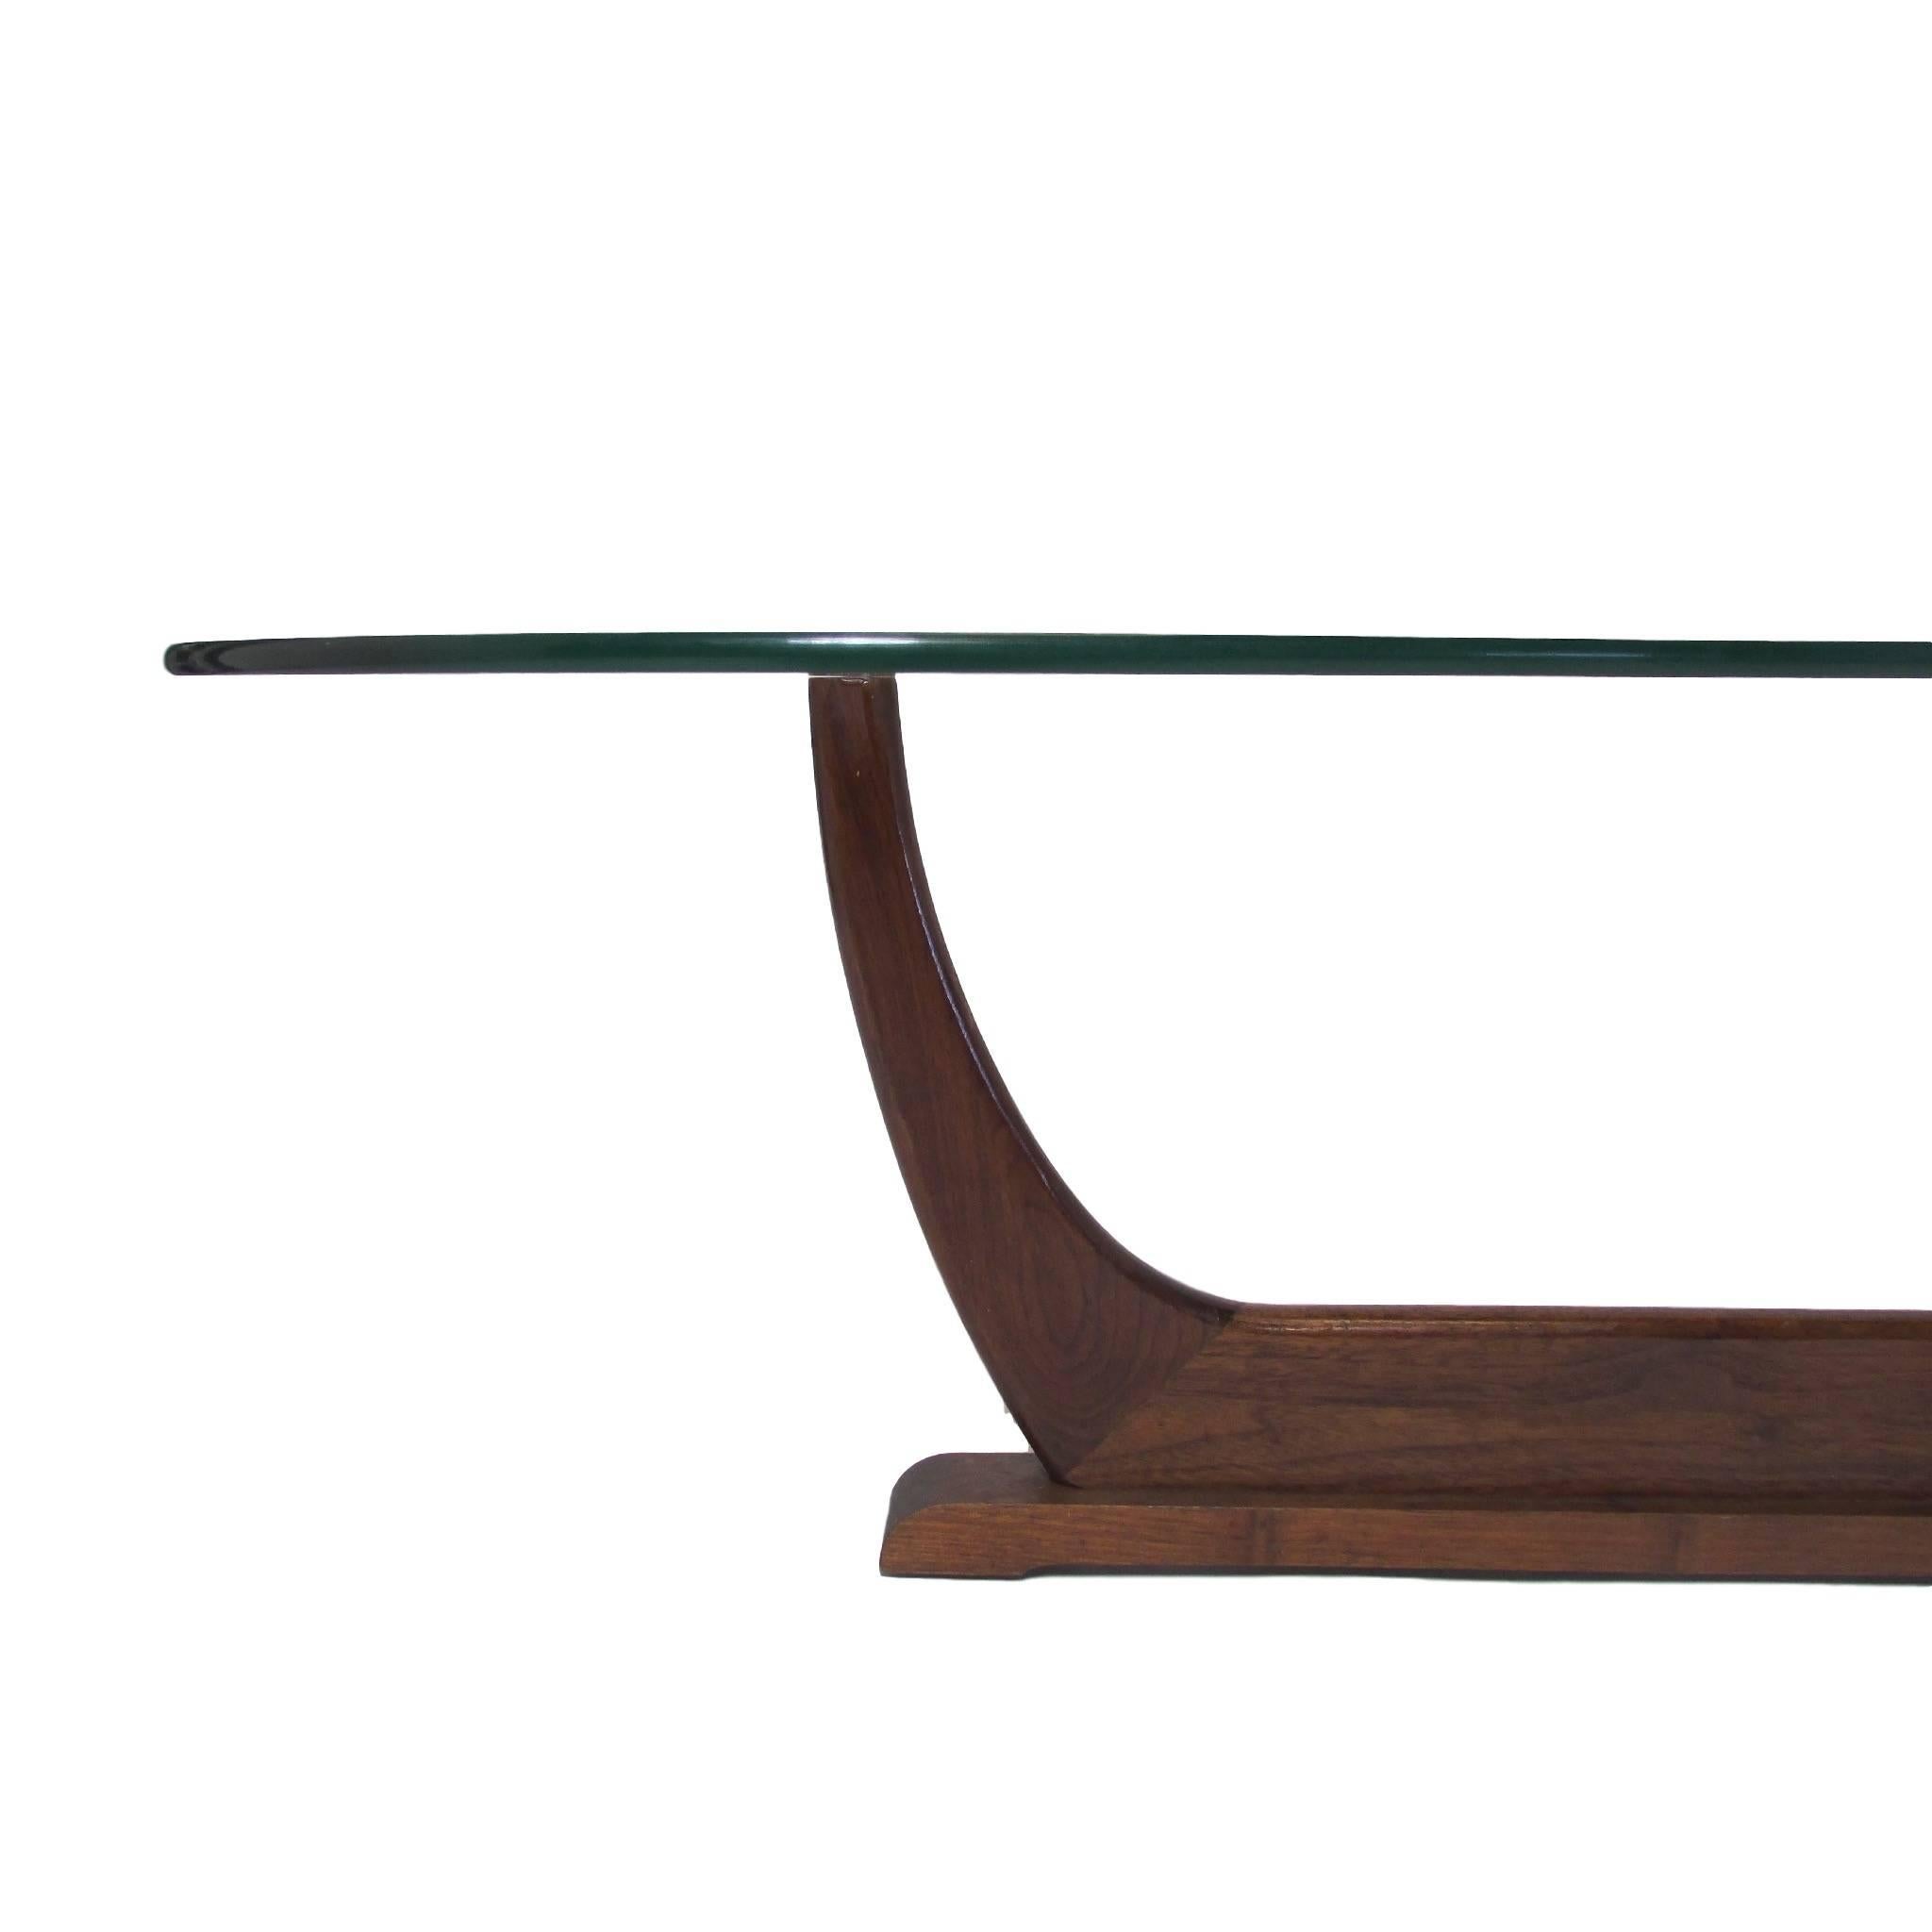 Unusual teak mid century modern tripod coffee table with a thick piece of kidney shaped glass.  